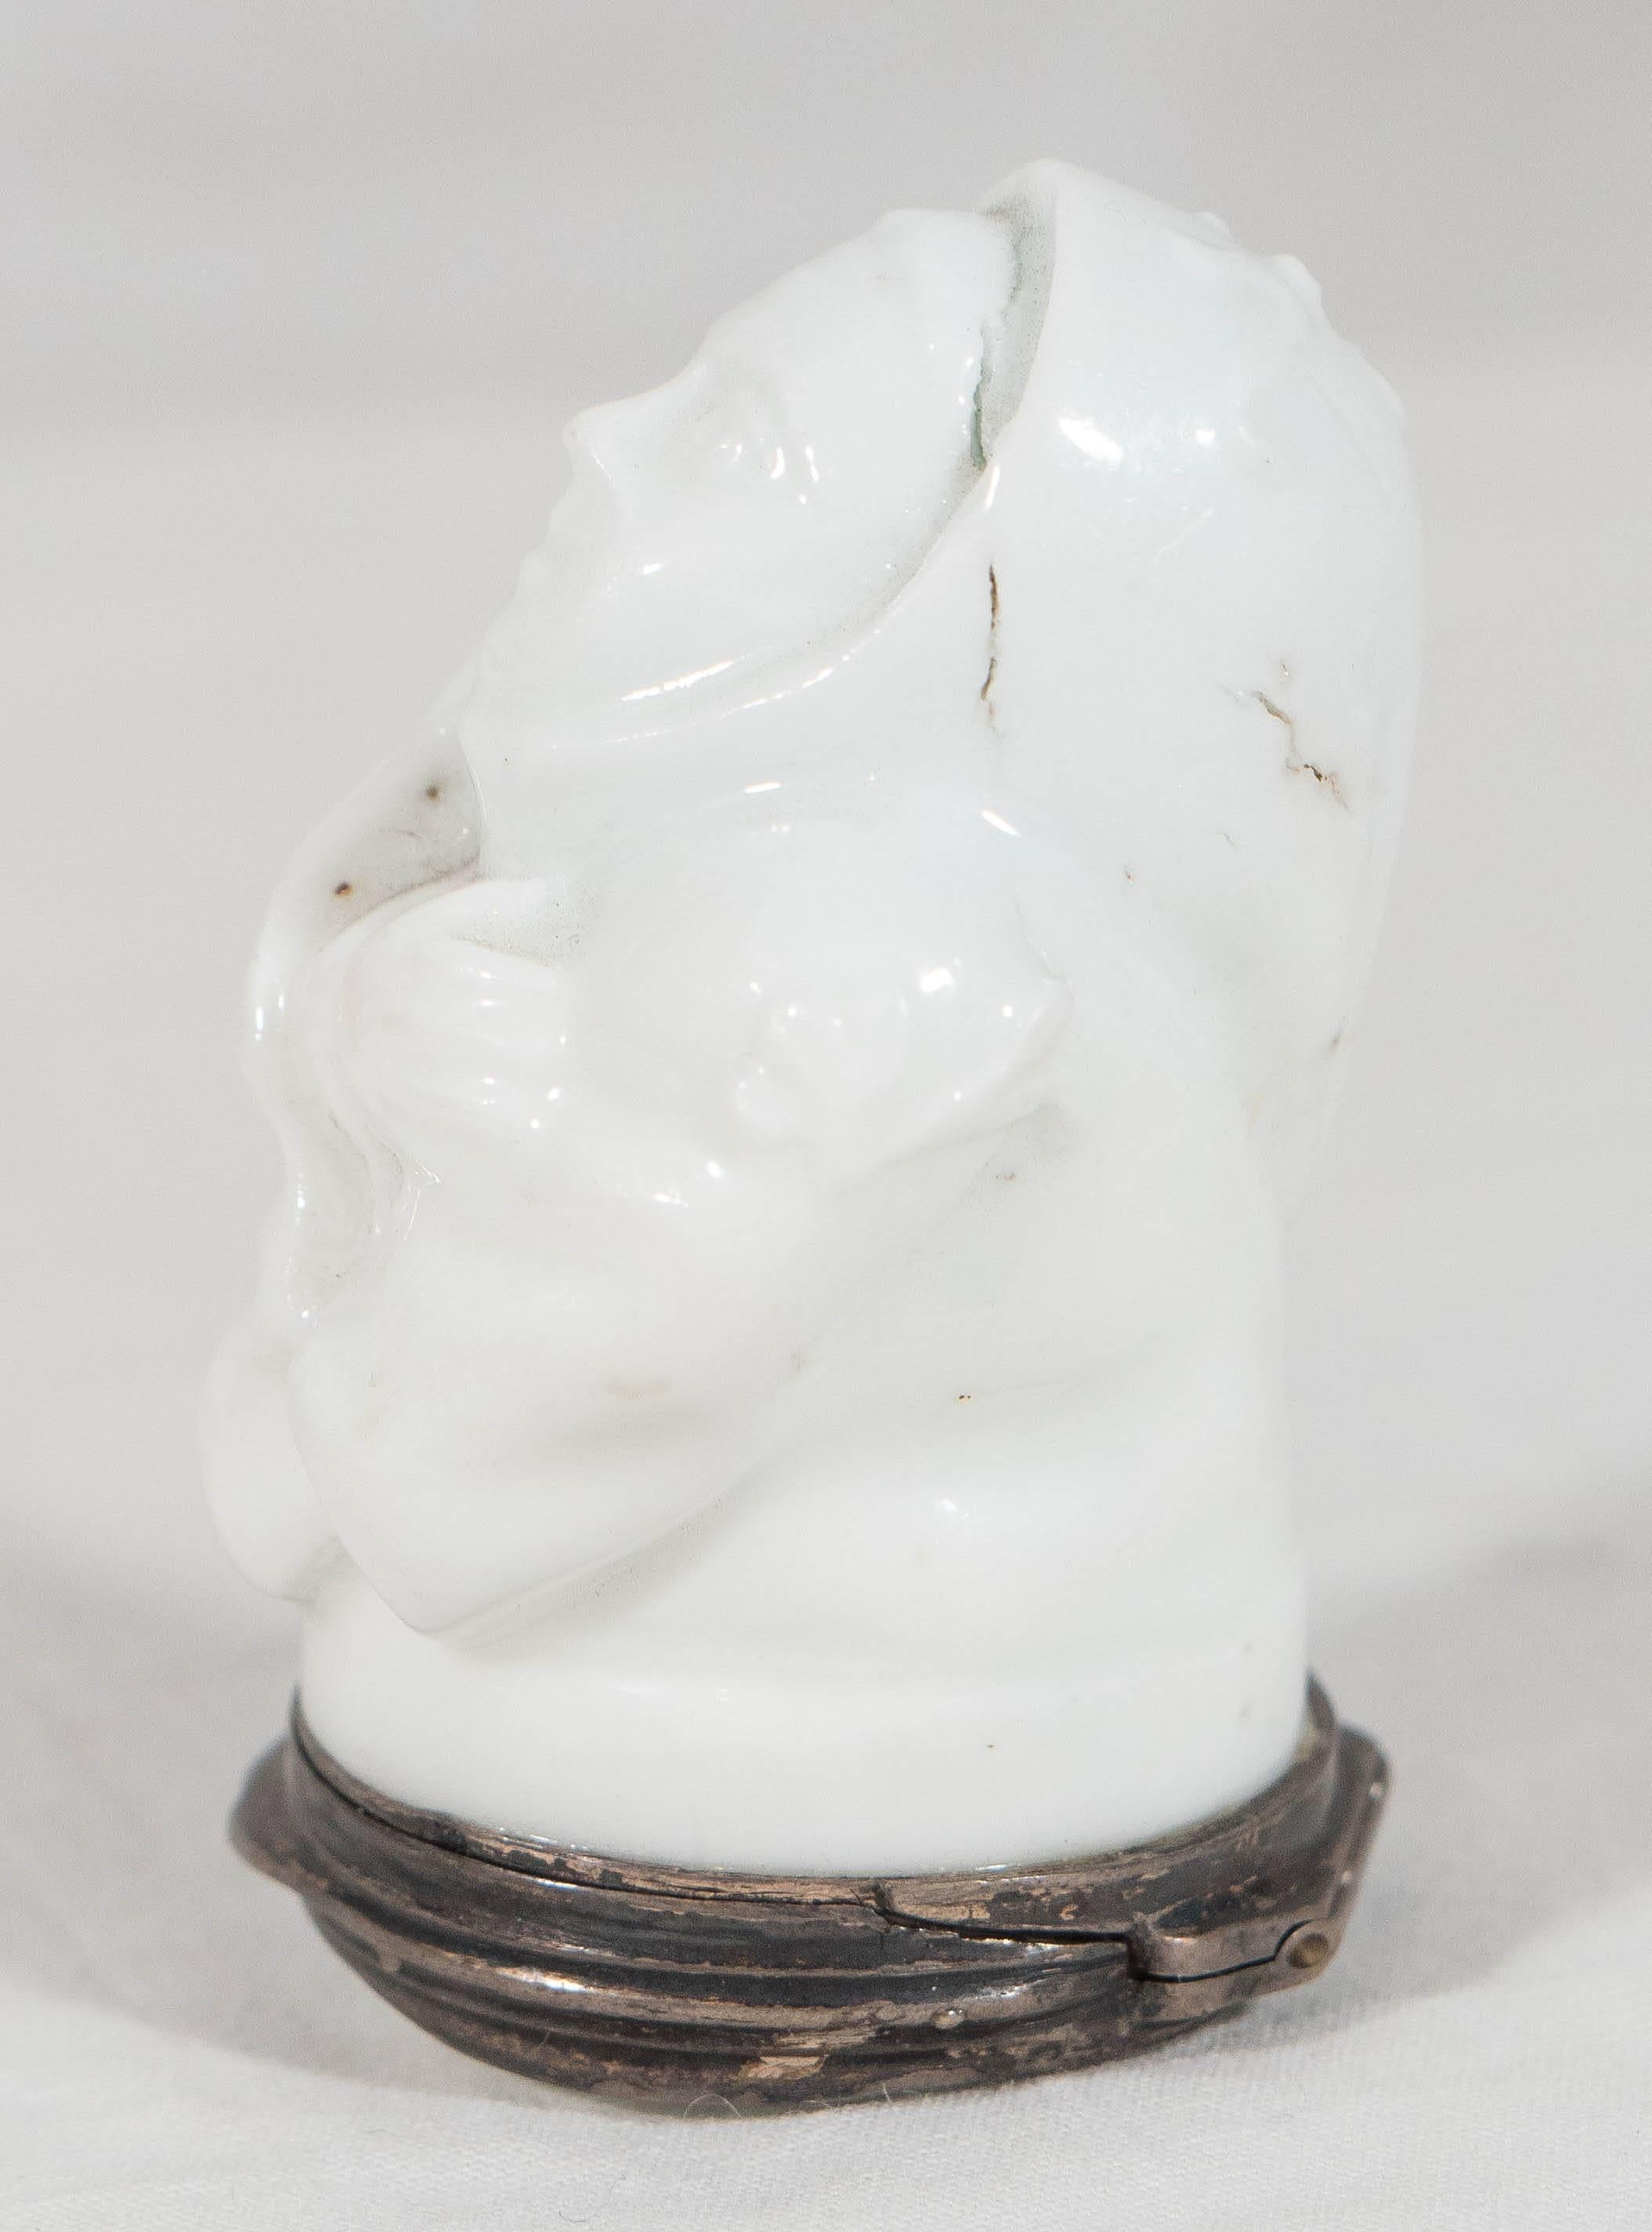 A rare 18th century porcelain snuff box naturalistically modeled as a friar wrapped in a hooded robe with only his face and hands exposed. The base is decorated with a single flower.
The Mennecy Porcelain Manufactory was one of the first French